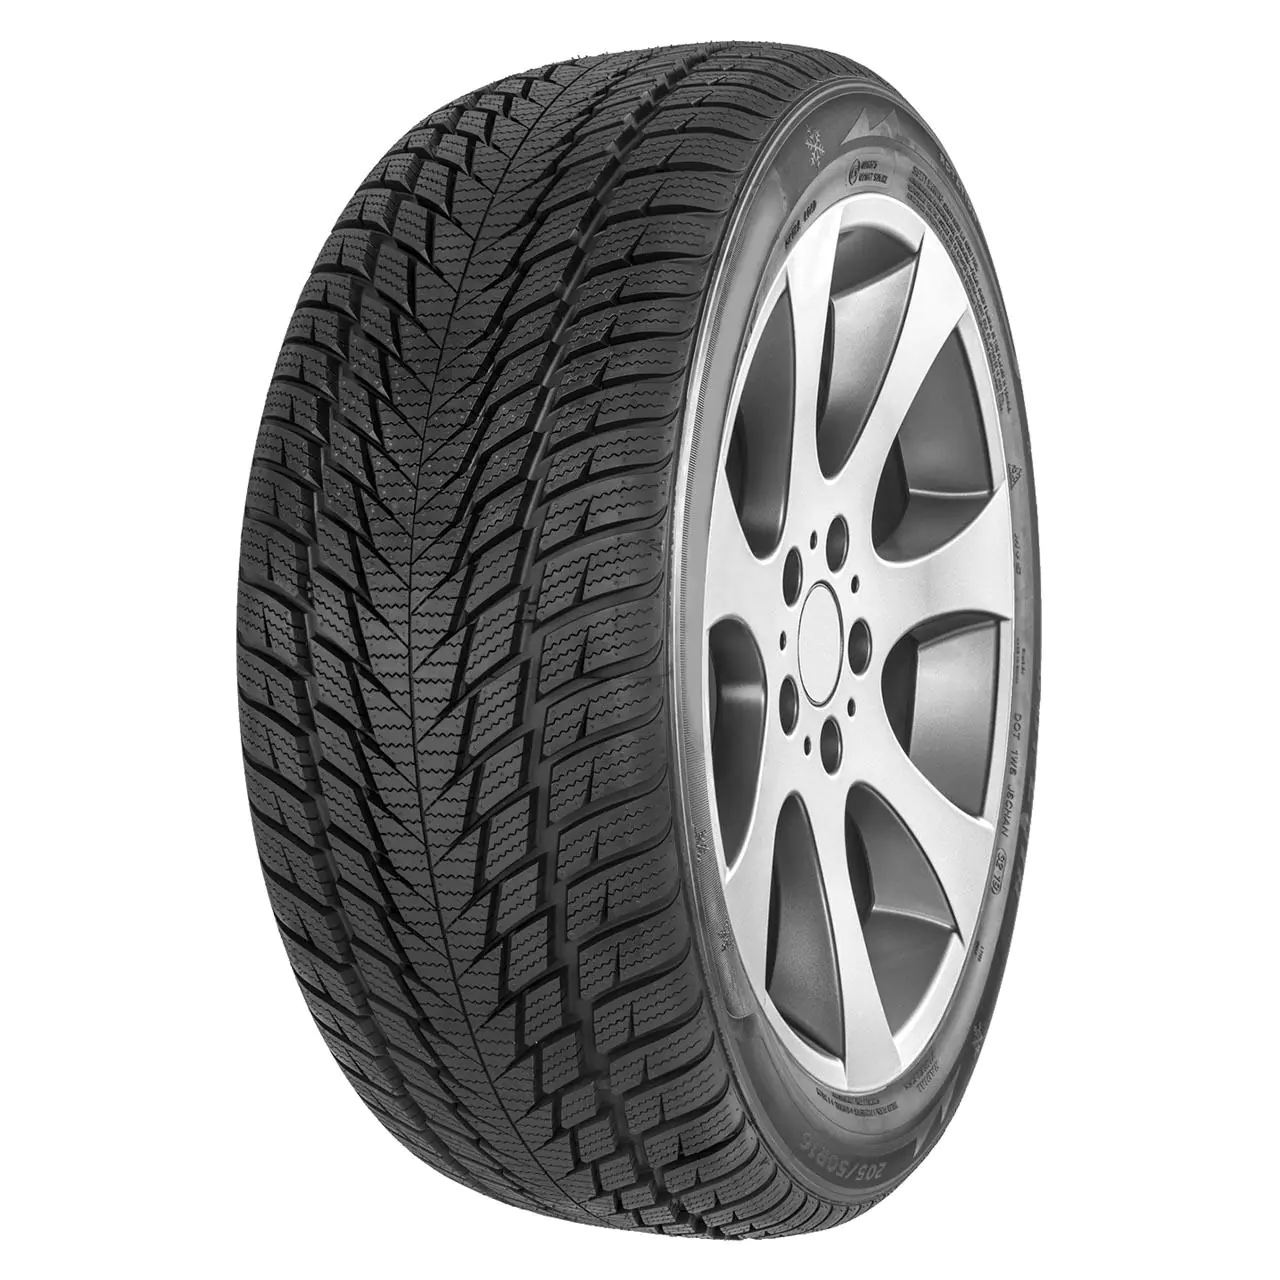 Gomme Autovettura Fortuna 195/60 R16 89V GOWIN UHP3 M+S Invernale